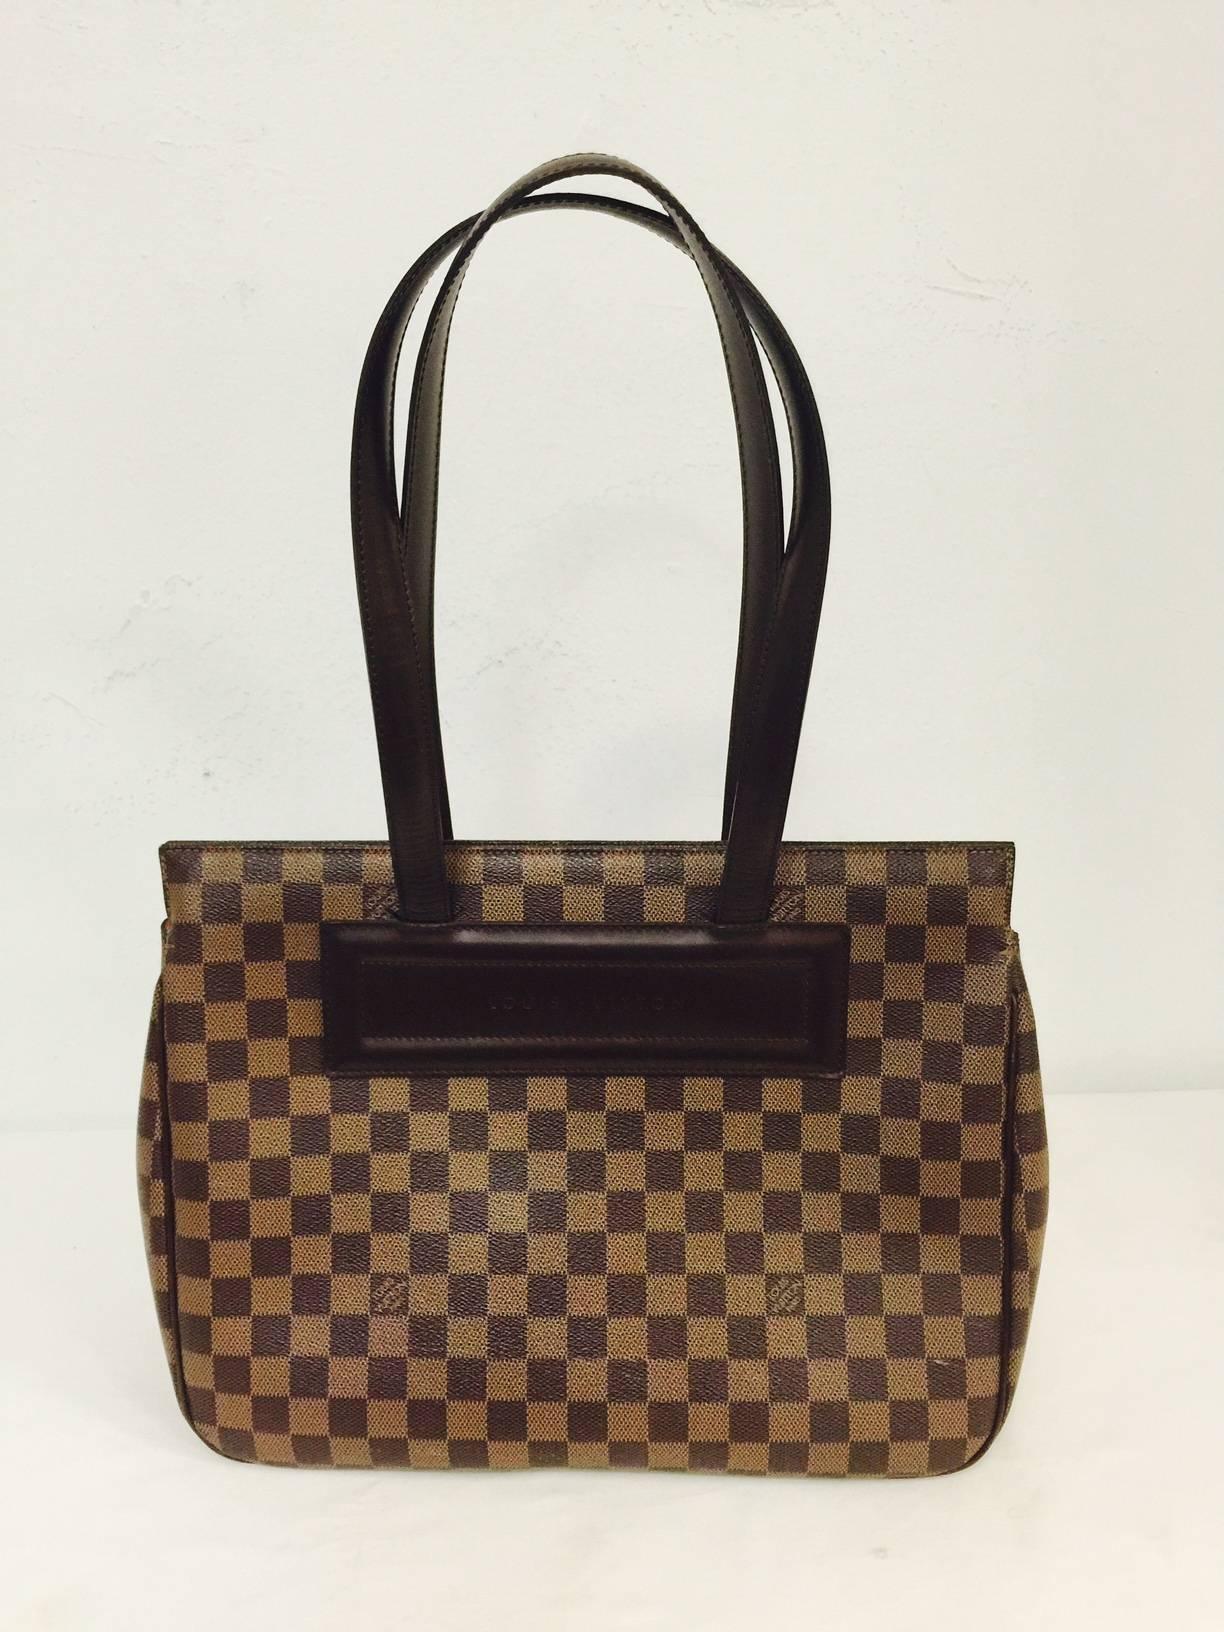 Louis Vuitton Parioli PM shoulder bag is a must for connoisseurs of all things 